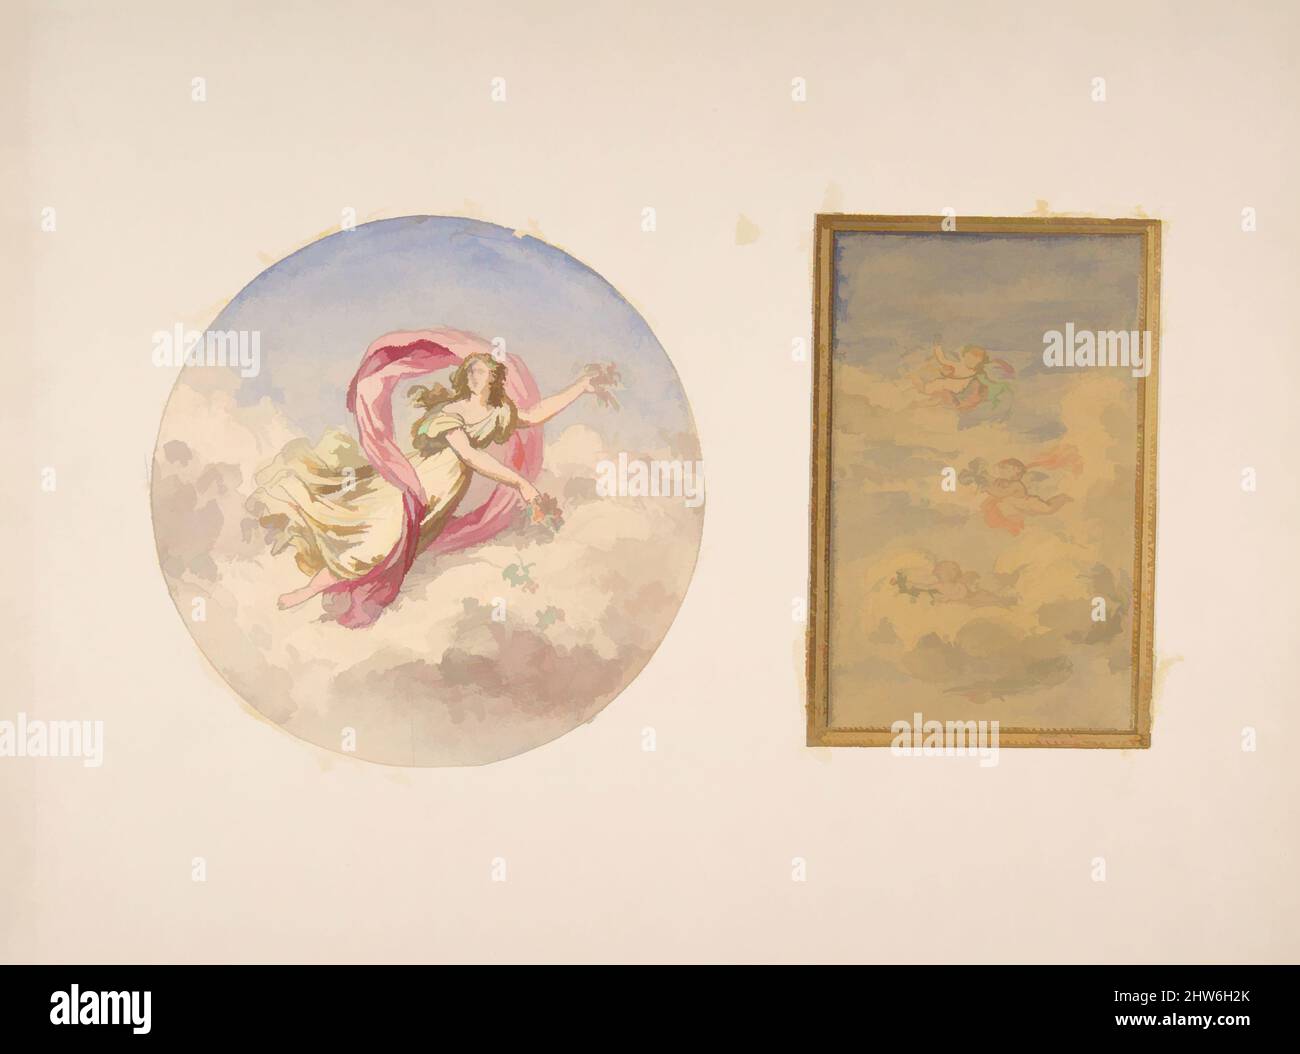 Art inspired by Two designs for the decoration of ceilings with figures in clouds, 1830–97, graphite, watercolor, and gold paint on wove papers mounted on cardboard, Drawings, Jules-Edmond-Charles Lachaise (French, died 1897), Eugène-Pierre Gourdet (French, born Paris, 1820, Classic works modernized by Artotop with a splash of modernity. Shapes, color and value, eye-catching visual impact on art. Emotions through freedom of artworks in a contemporary way. A timeless message pursuing a wildly creative new direction. Artists turning to the digital medium and creating the Artotop NFT Stock Photo